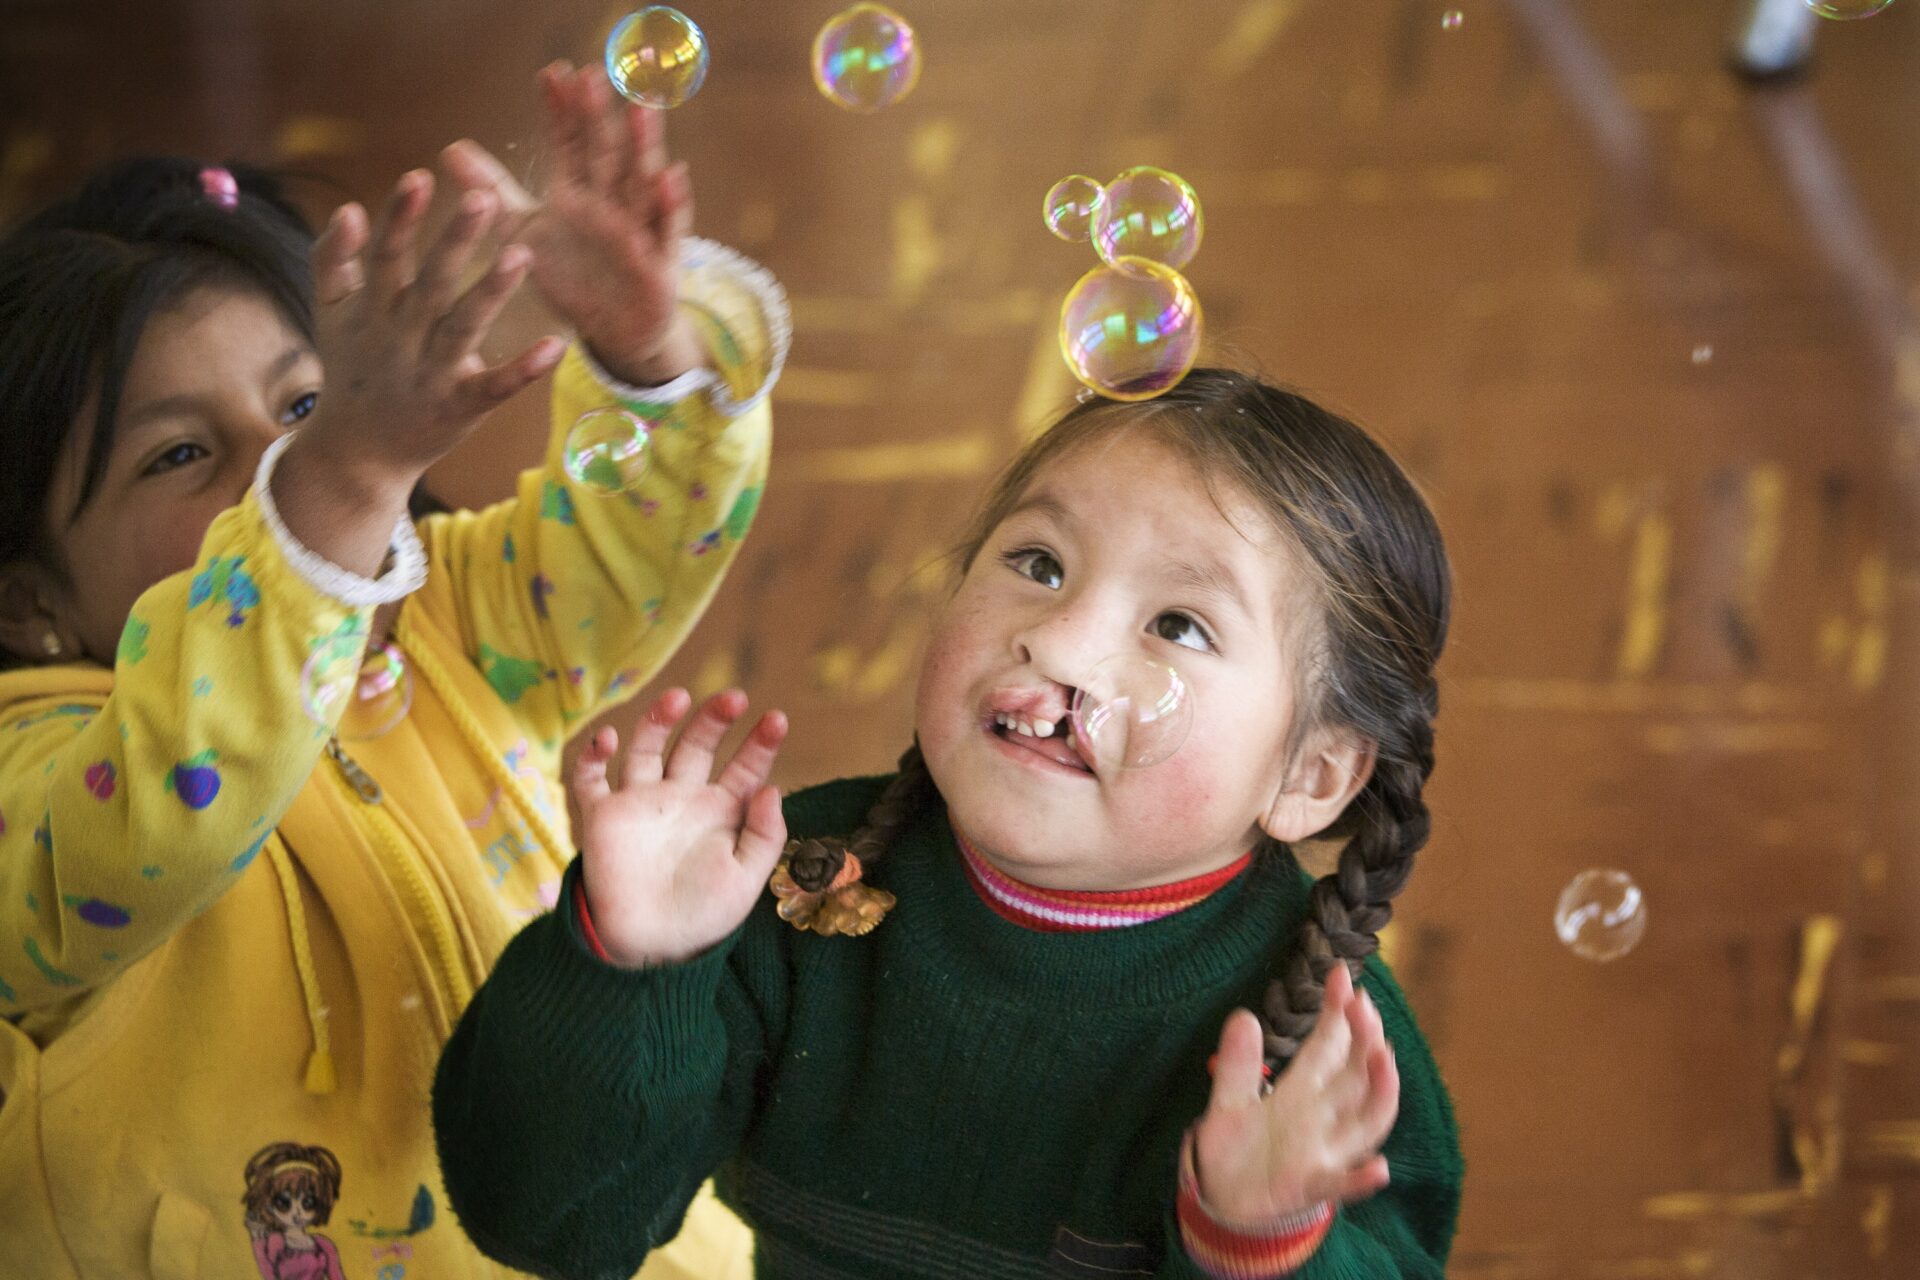 A girl from Peru with a cleft lip tries to blow bubbles